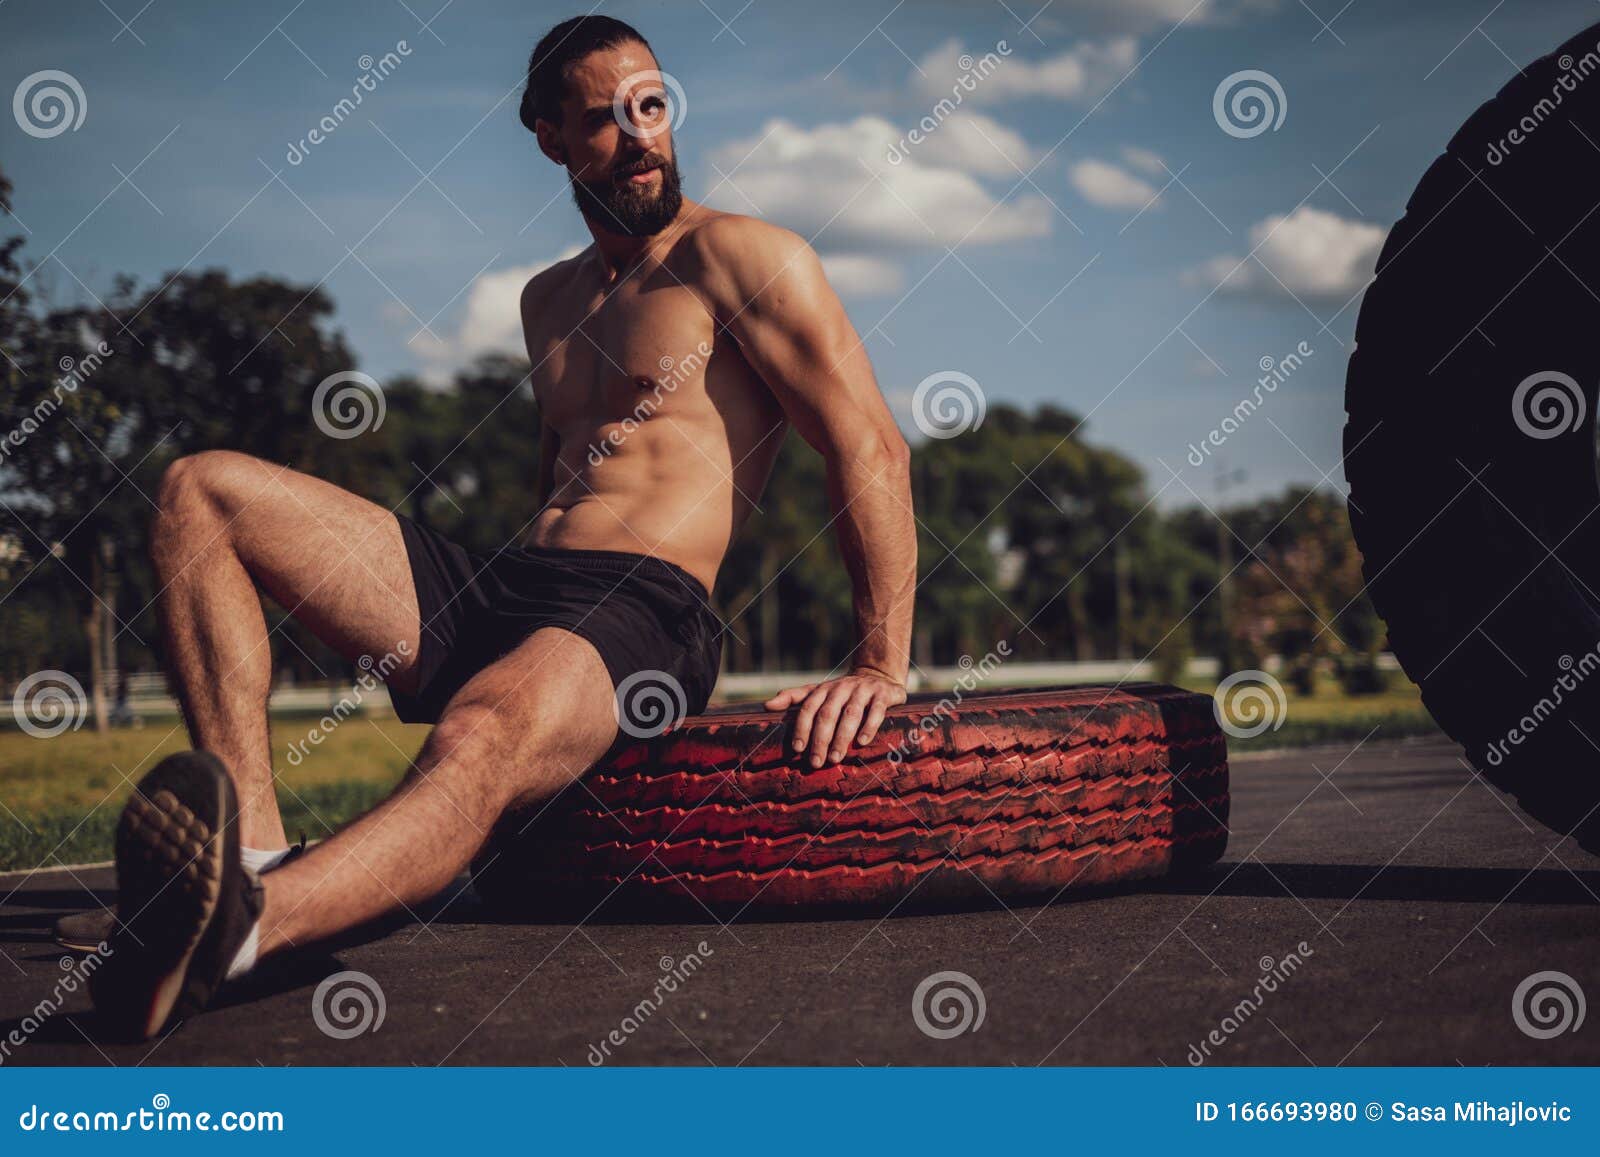 hipster athlete resting on the tire afte workout